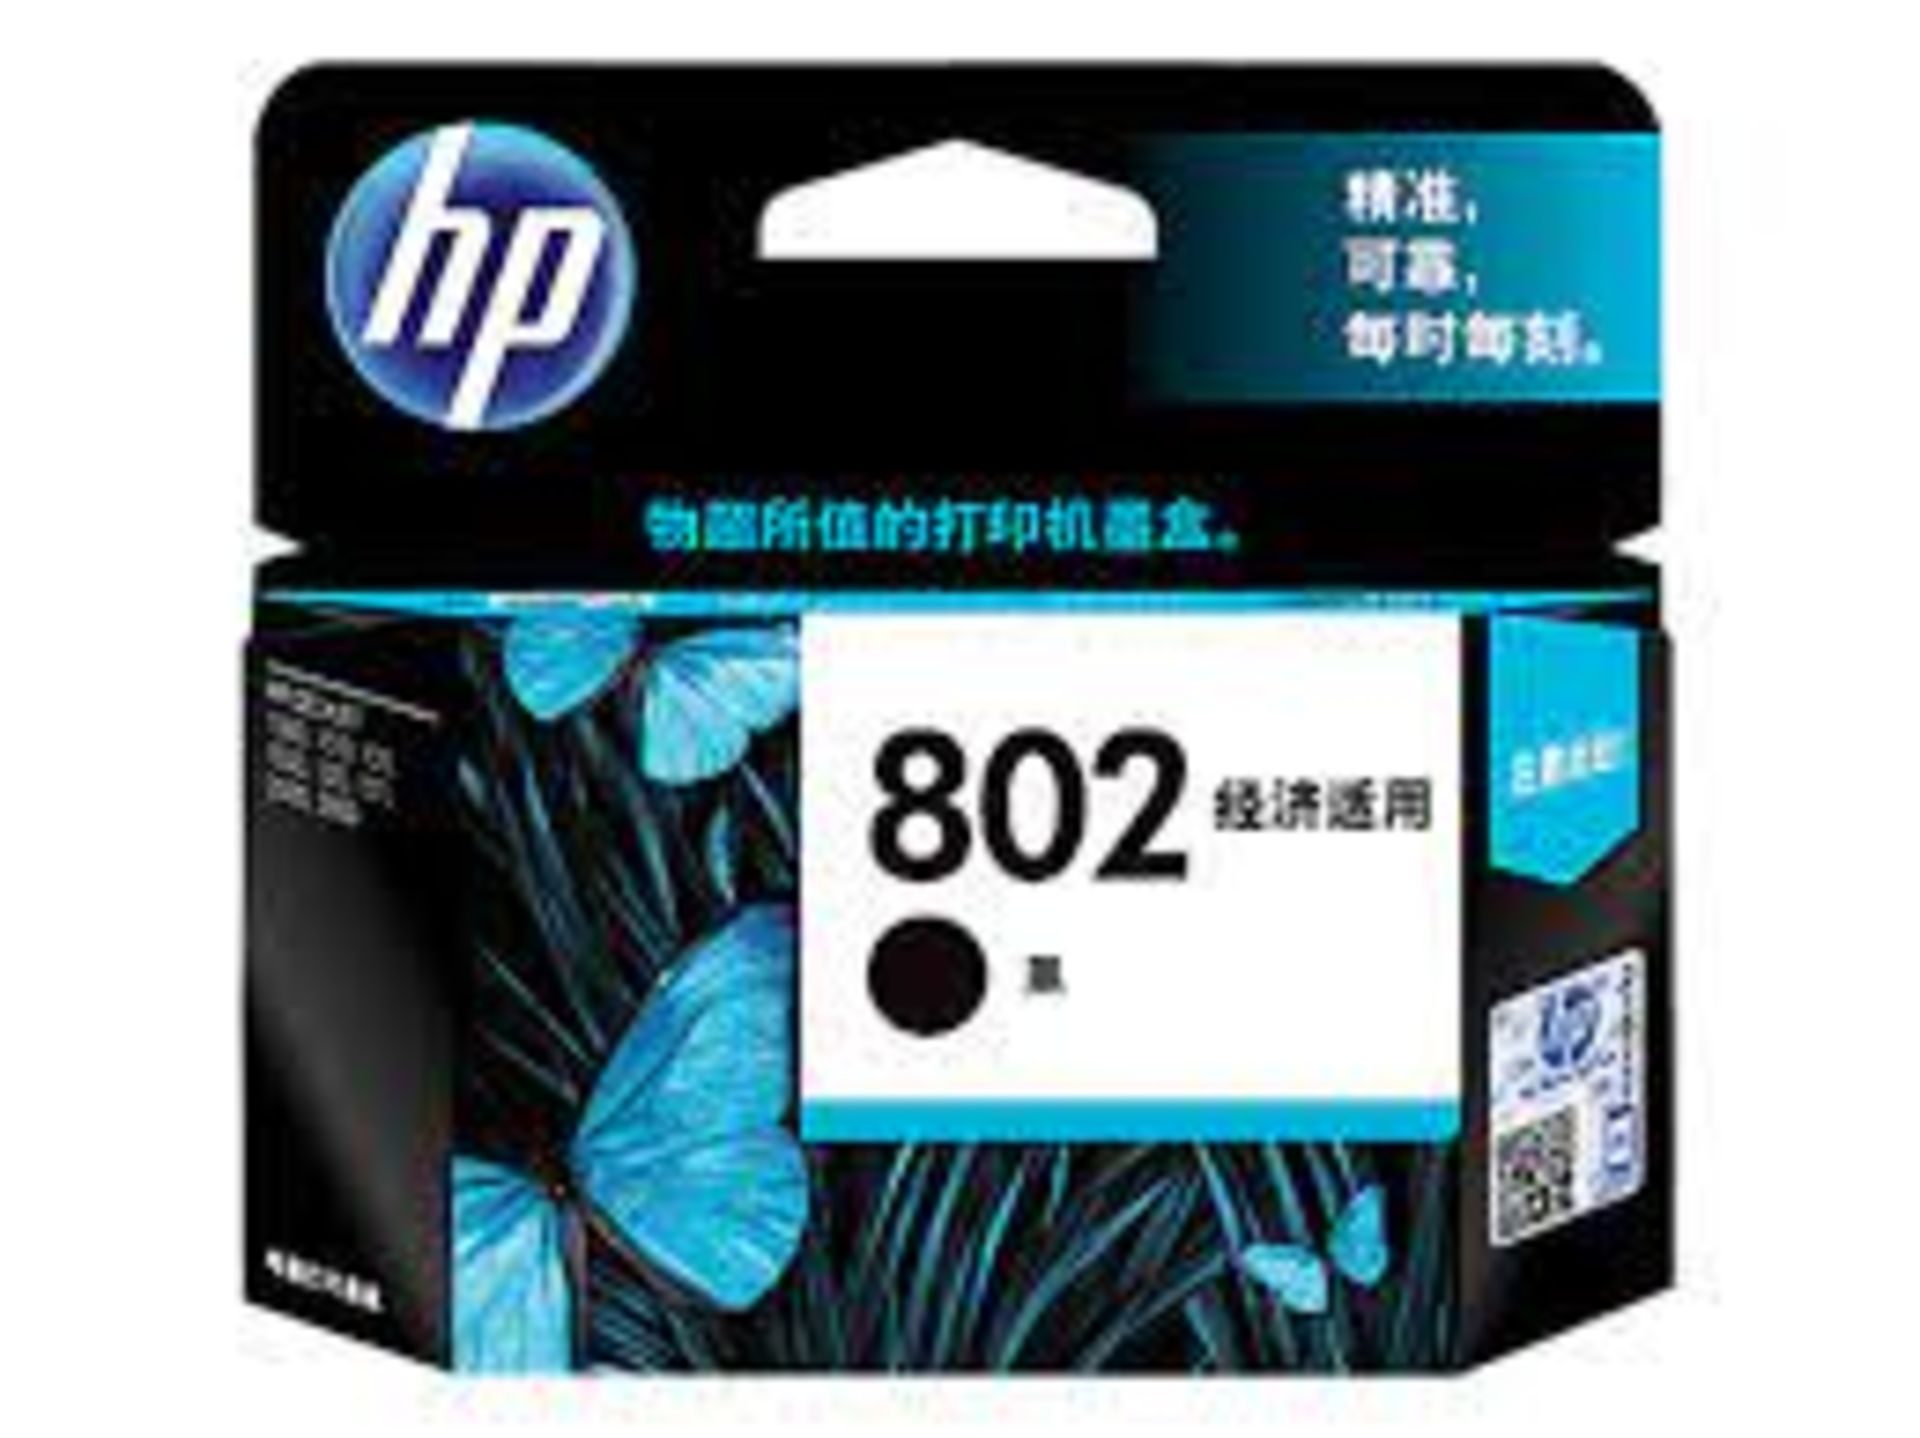 OVER 16000 BRAND NEW PRINTER CARTRIDGES/TONERS COMPATIBLE WITH BROTHER, EPSON, HP, CANON ETC. OVER 3 - Image 2 of 10